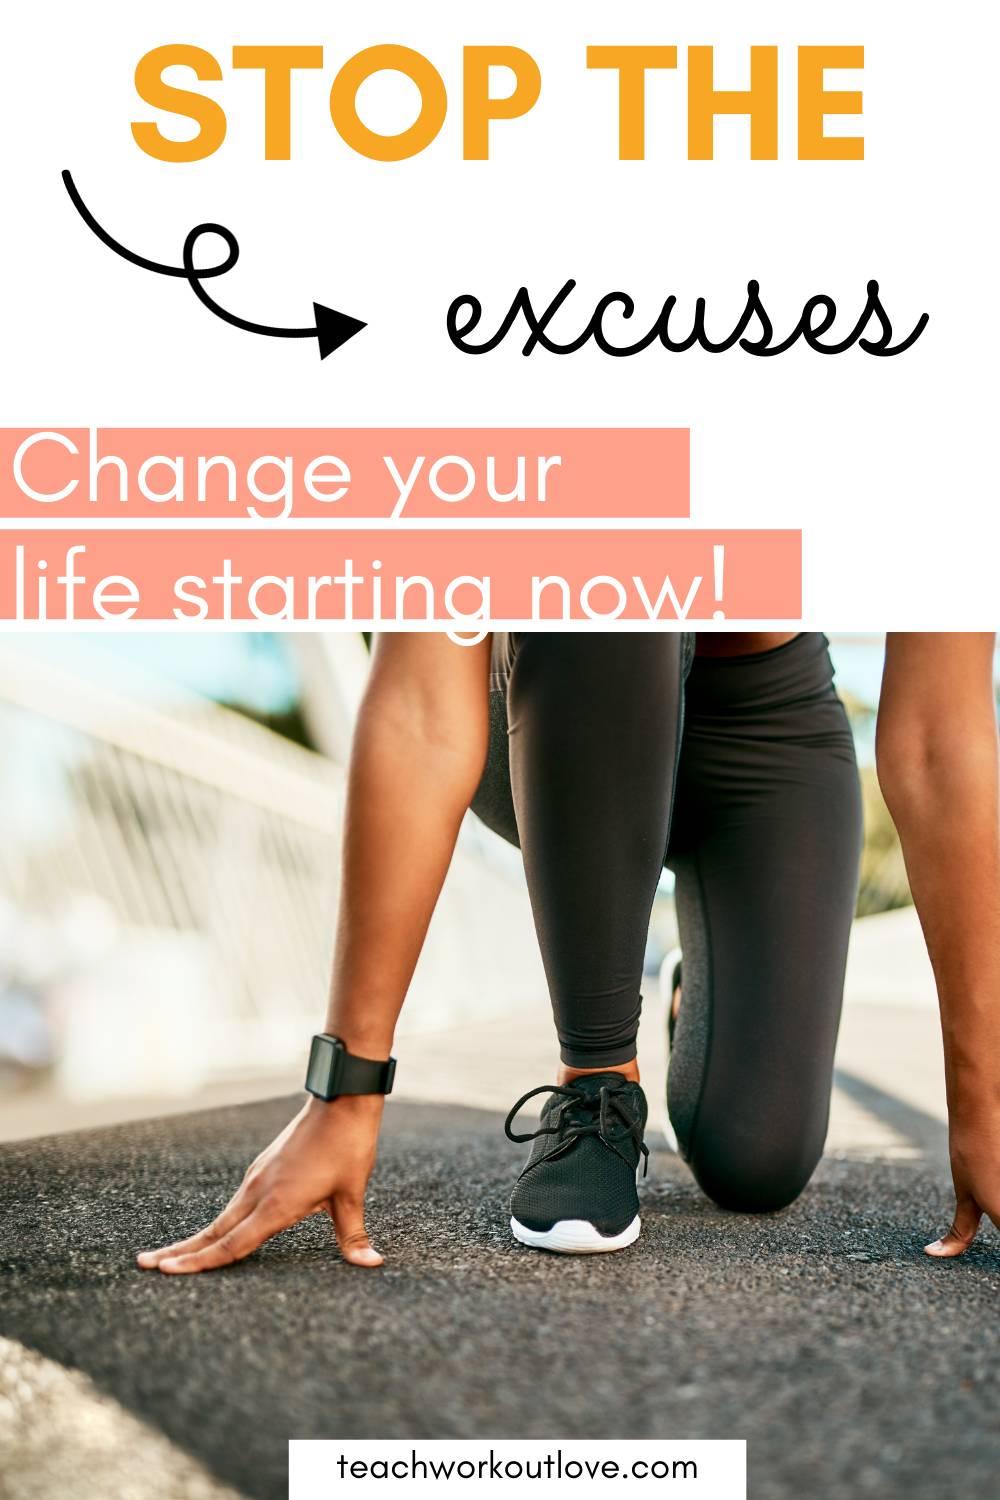 It’s time to change your life. Stop with the excuses and start changing your life for the better, right now. Here’s how to do that…